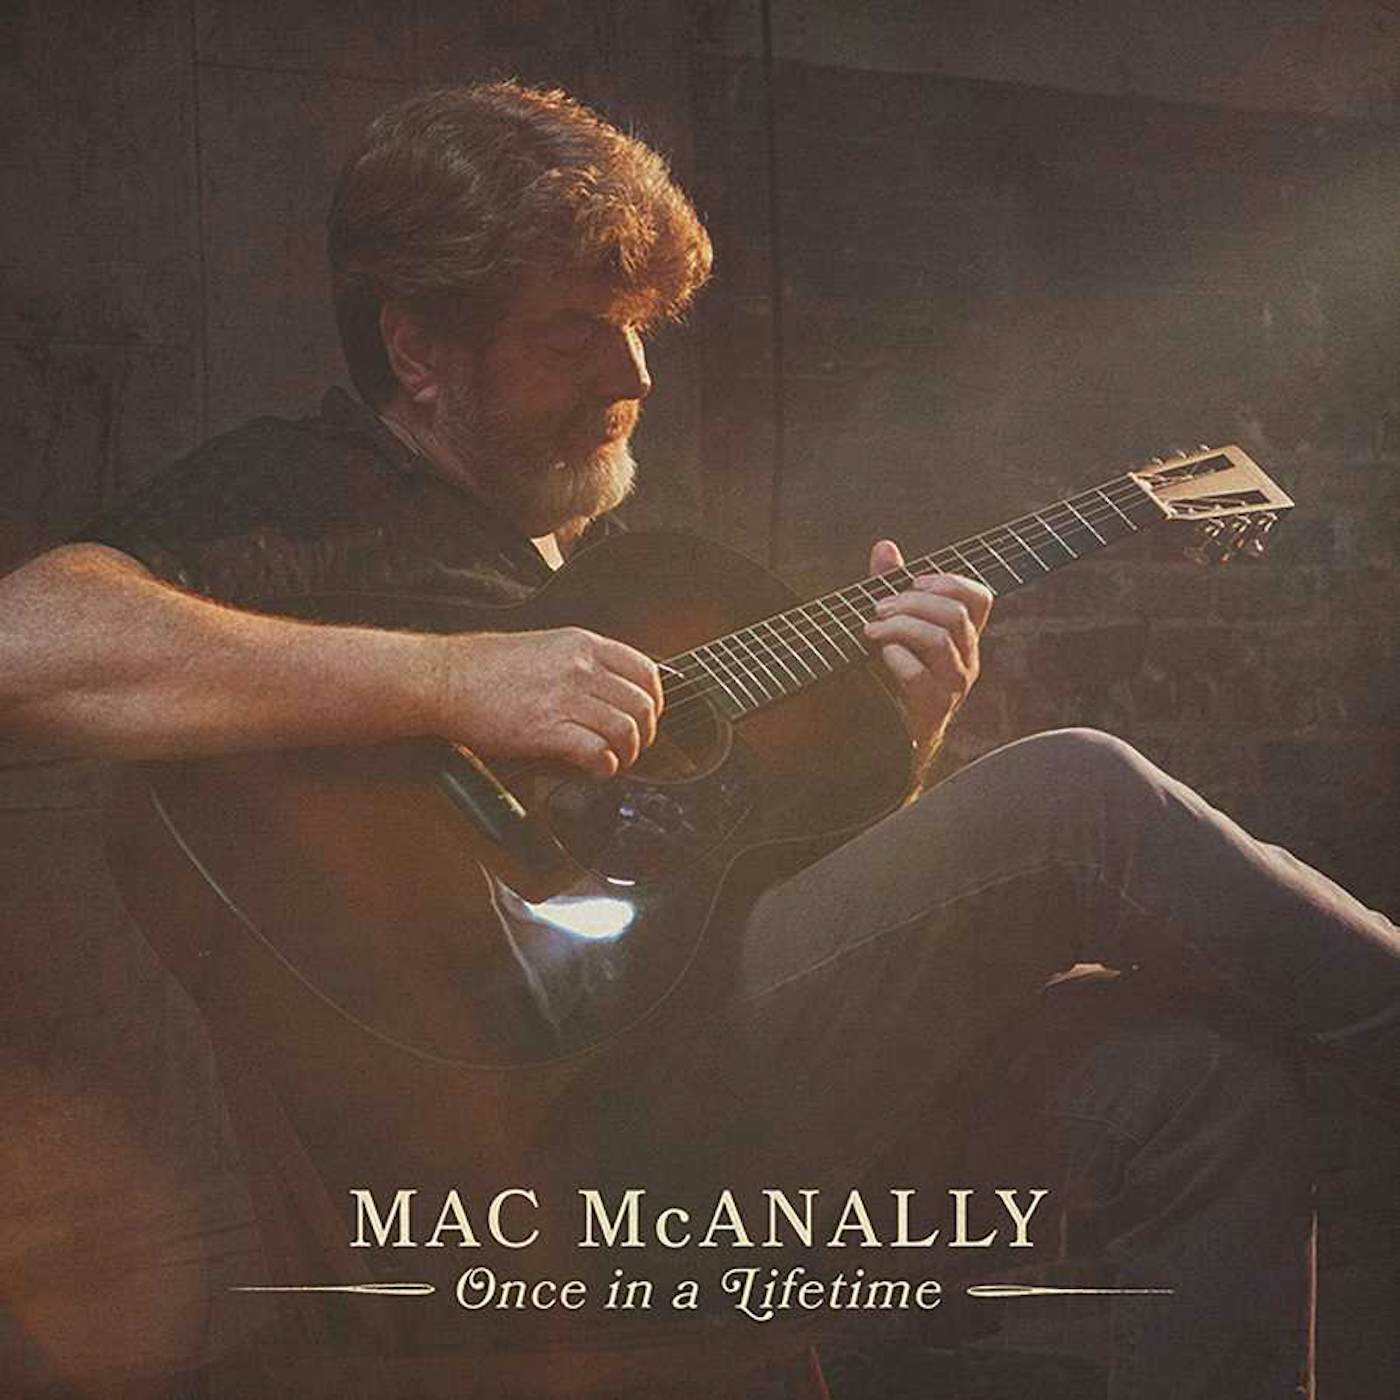 Mac McAnally ONCE IN A LIFETIME Vinyl Record